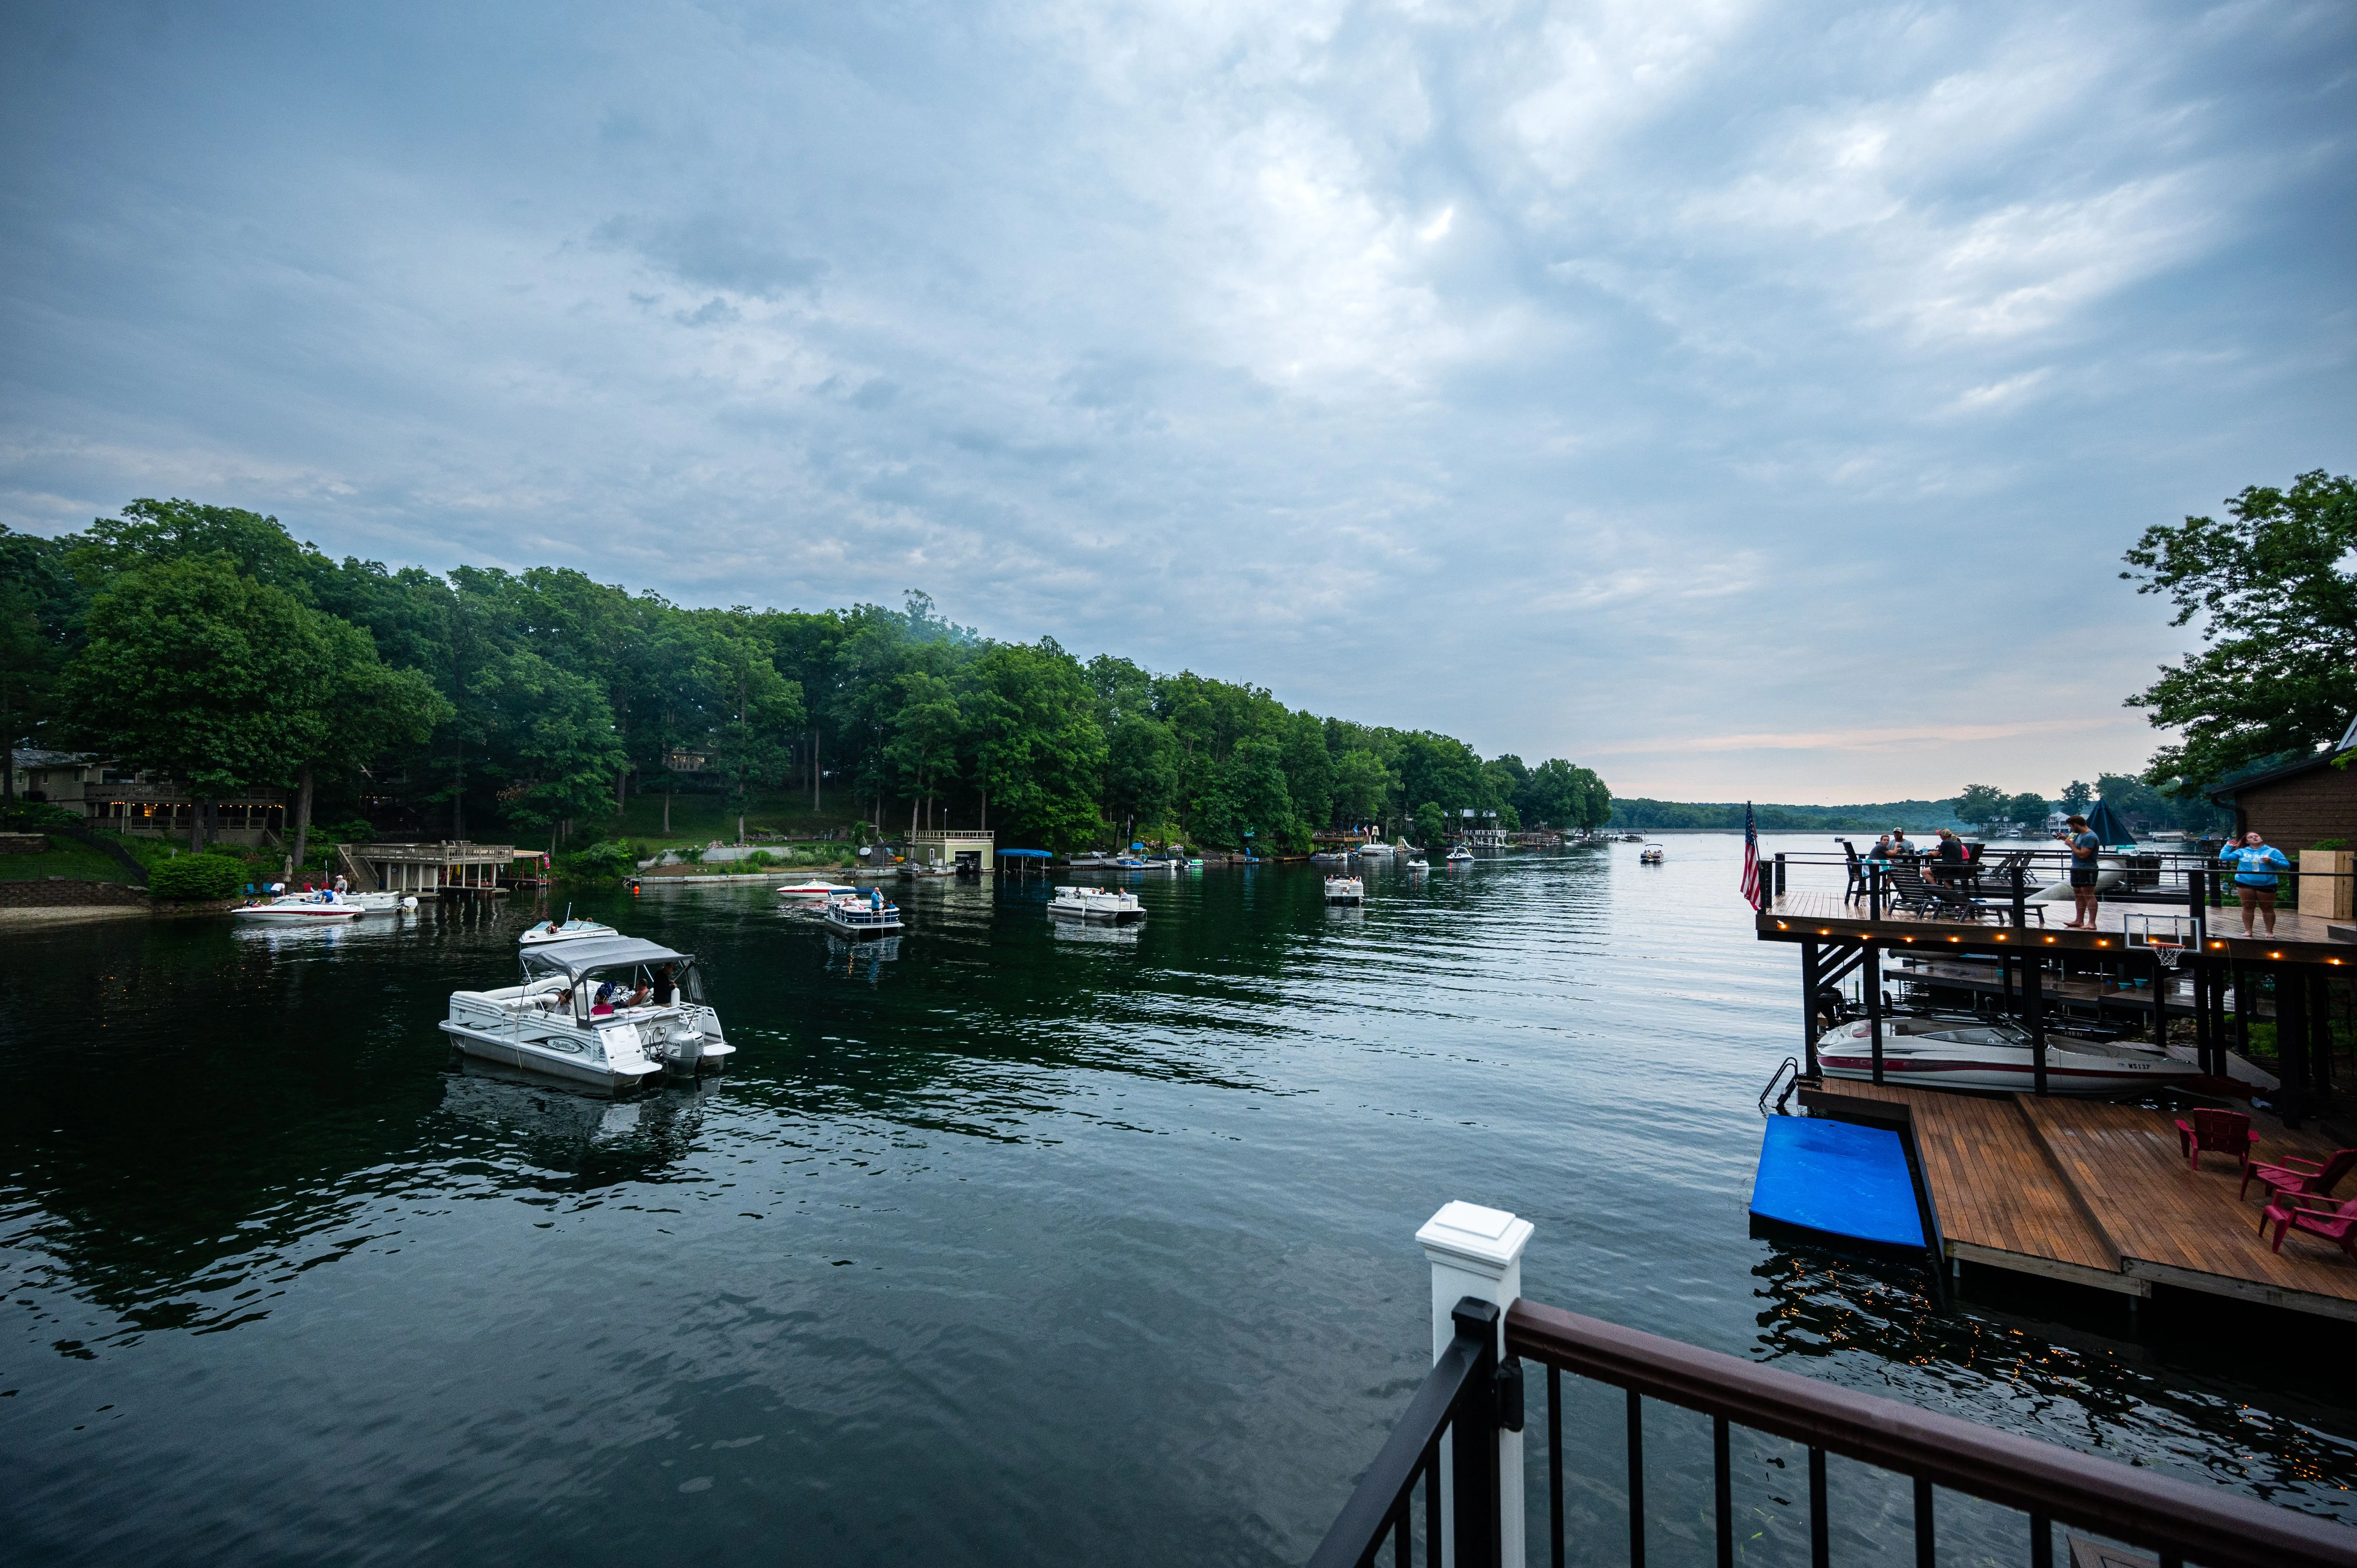 Scenic view of a calm river with boats docked along the shore, as seen from a balcony with railing.